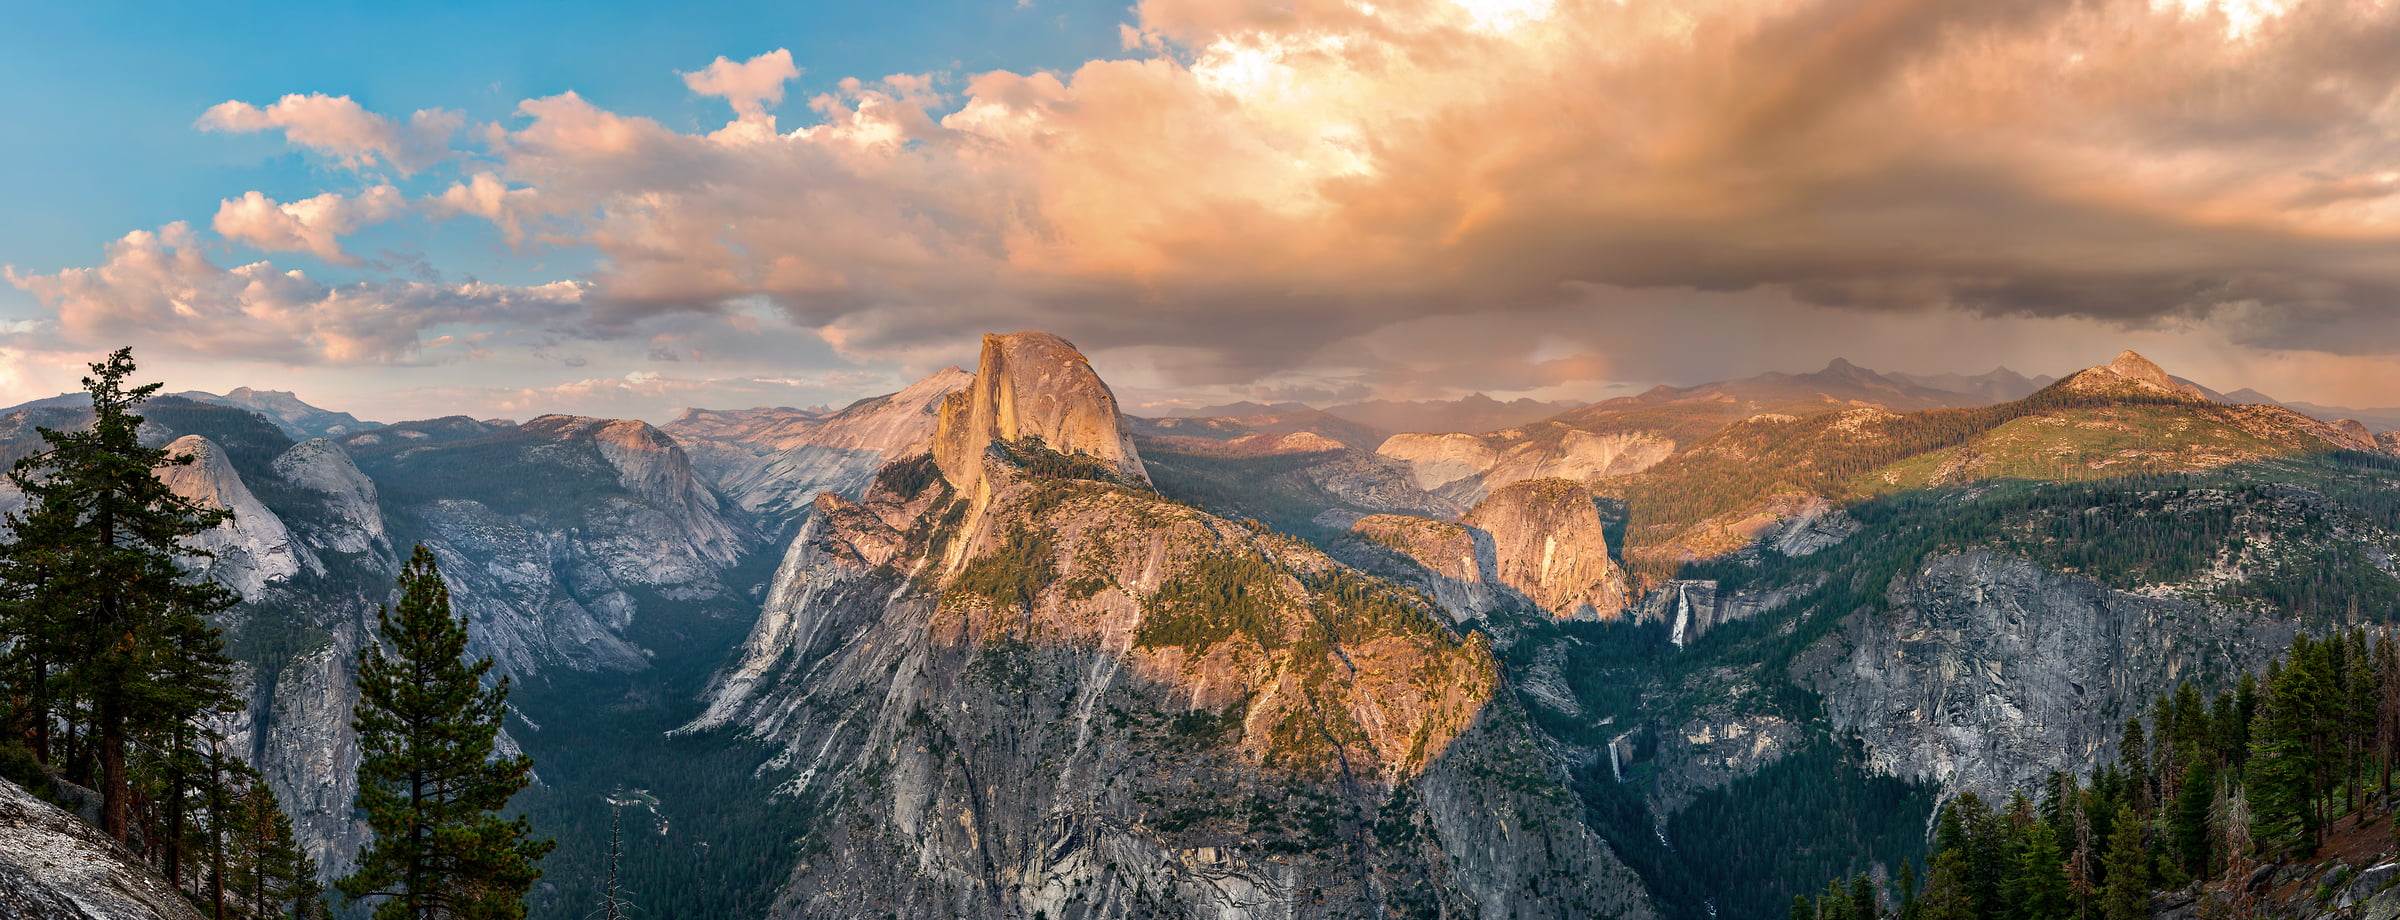 946 megapixels! A very high resolution, large-format VAST photo print of the Yosemite Naitonal Park valley and Half Dome at sunset from Glacier Point; nature landscape photo created by Justin Katz